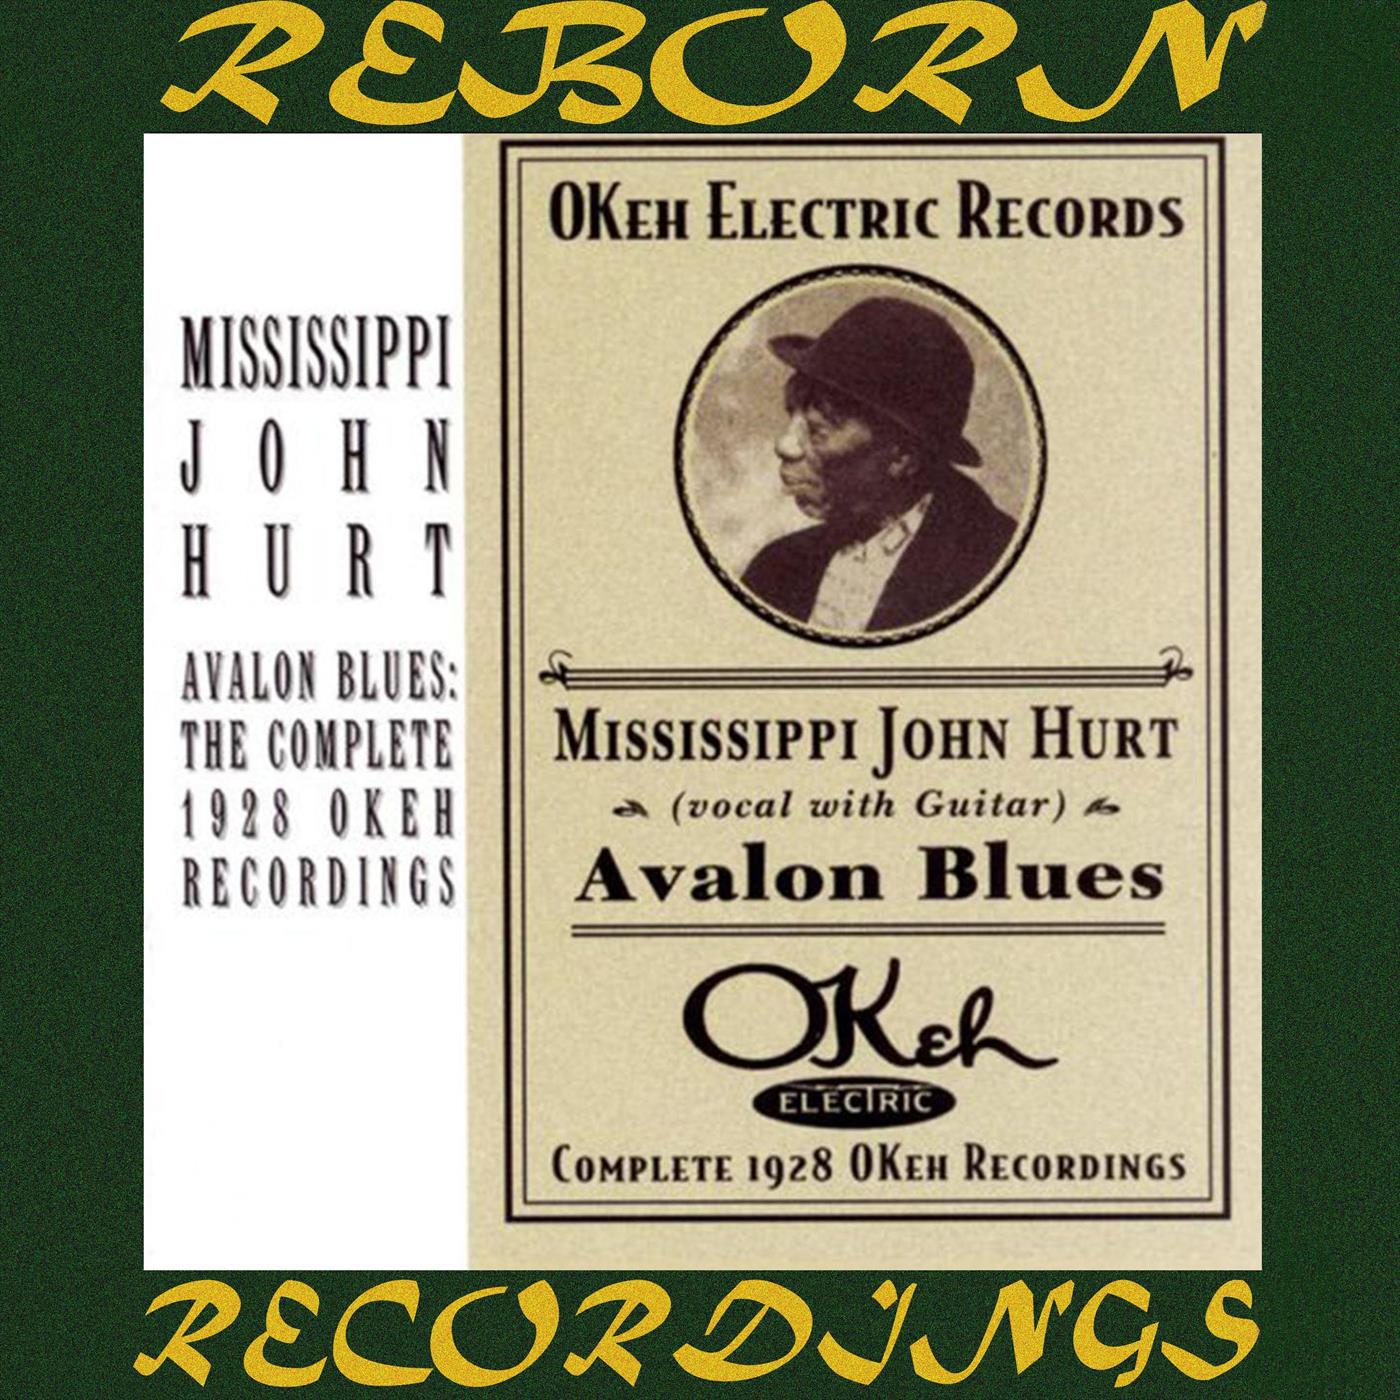 Avalon Blues, The Complete 1928 Okeh Recordings (HD Remastered)